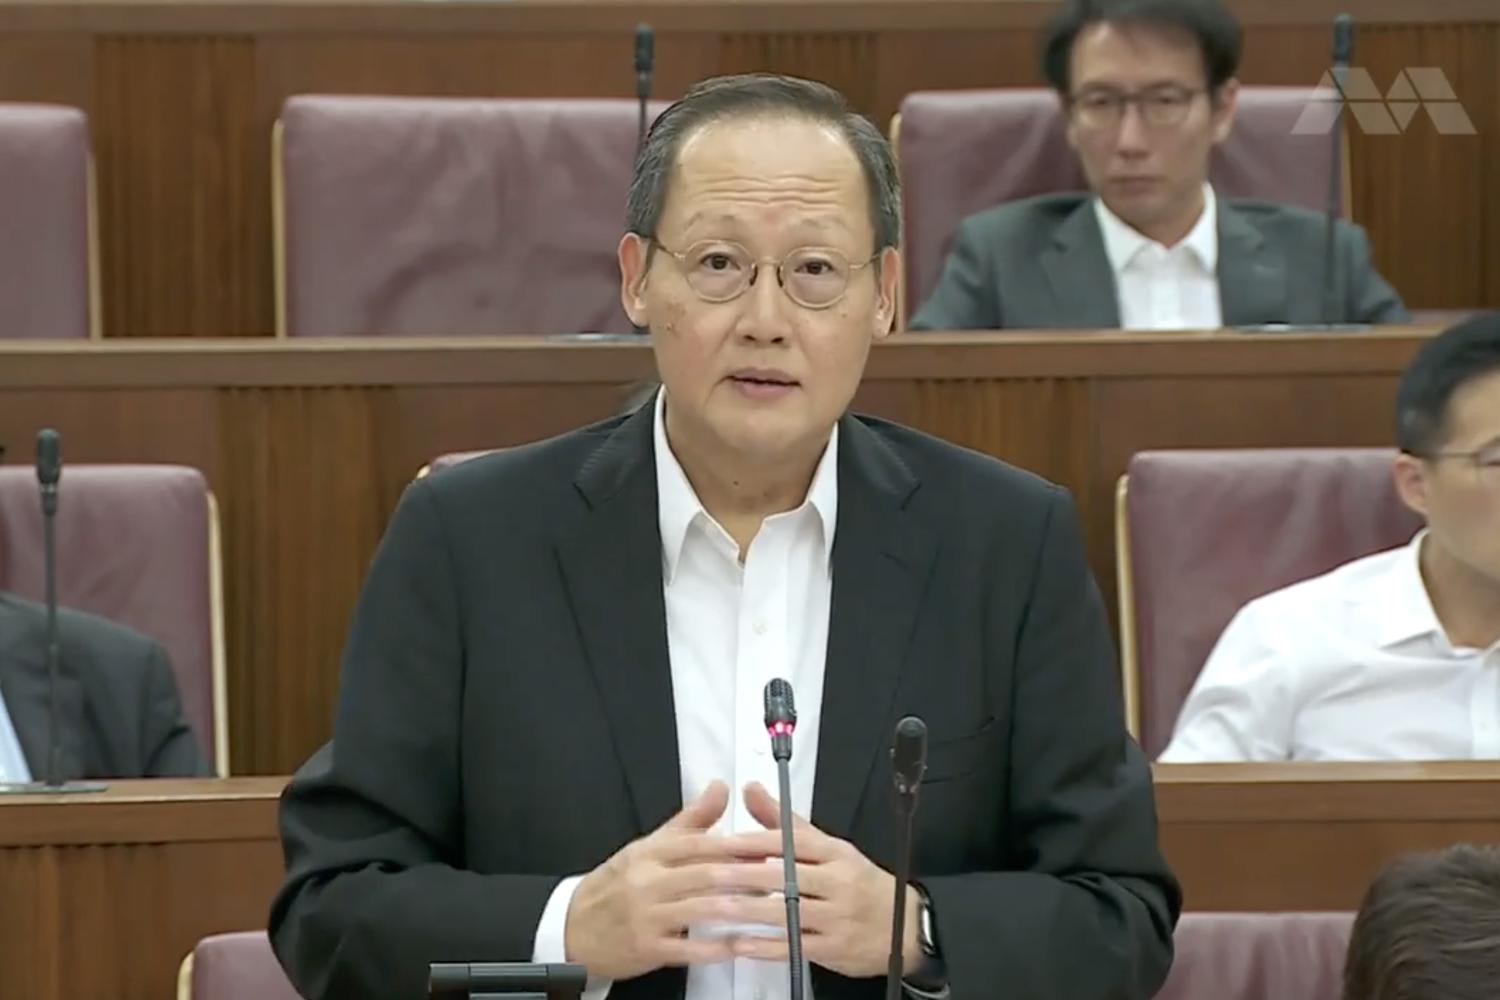 Manpower Minister Tan See Leng speaking in Parliament on Sept 12, 2022.